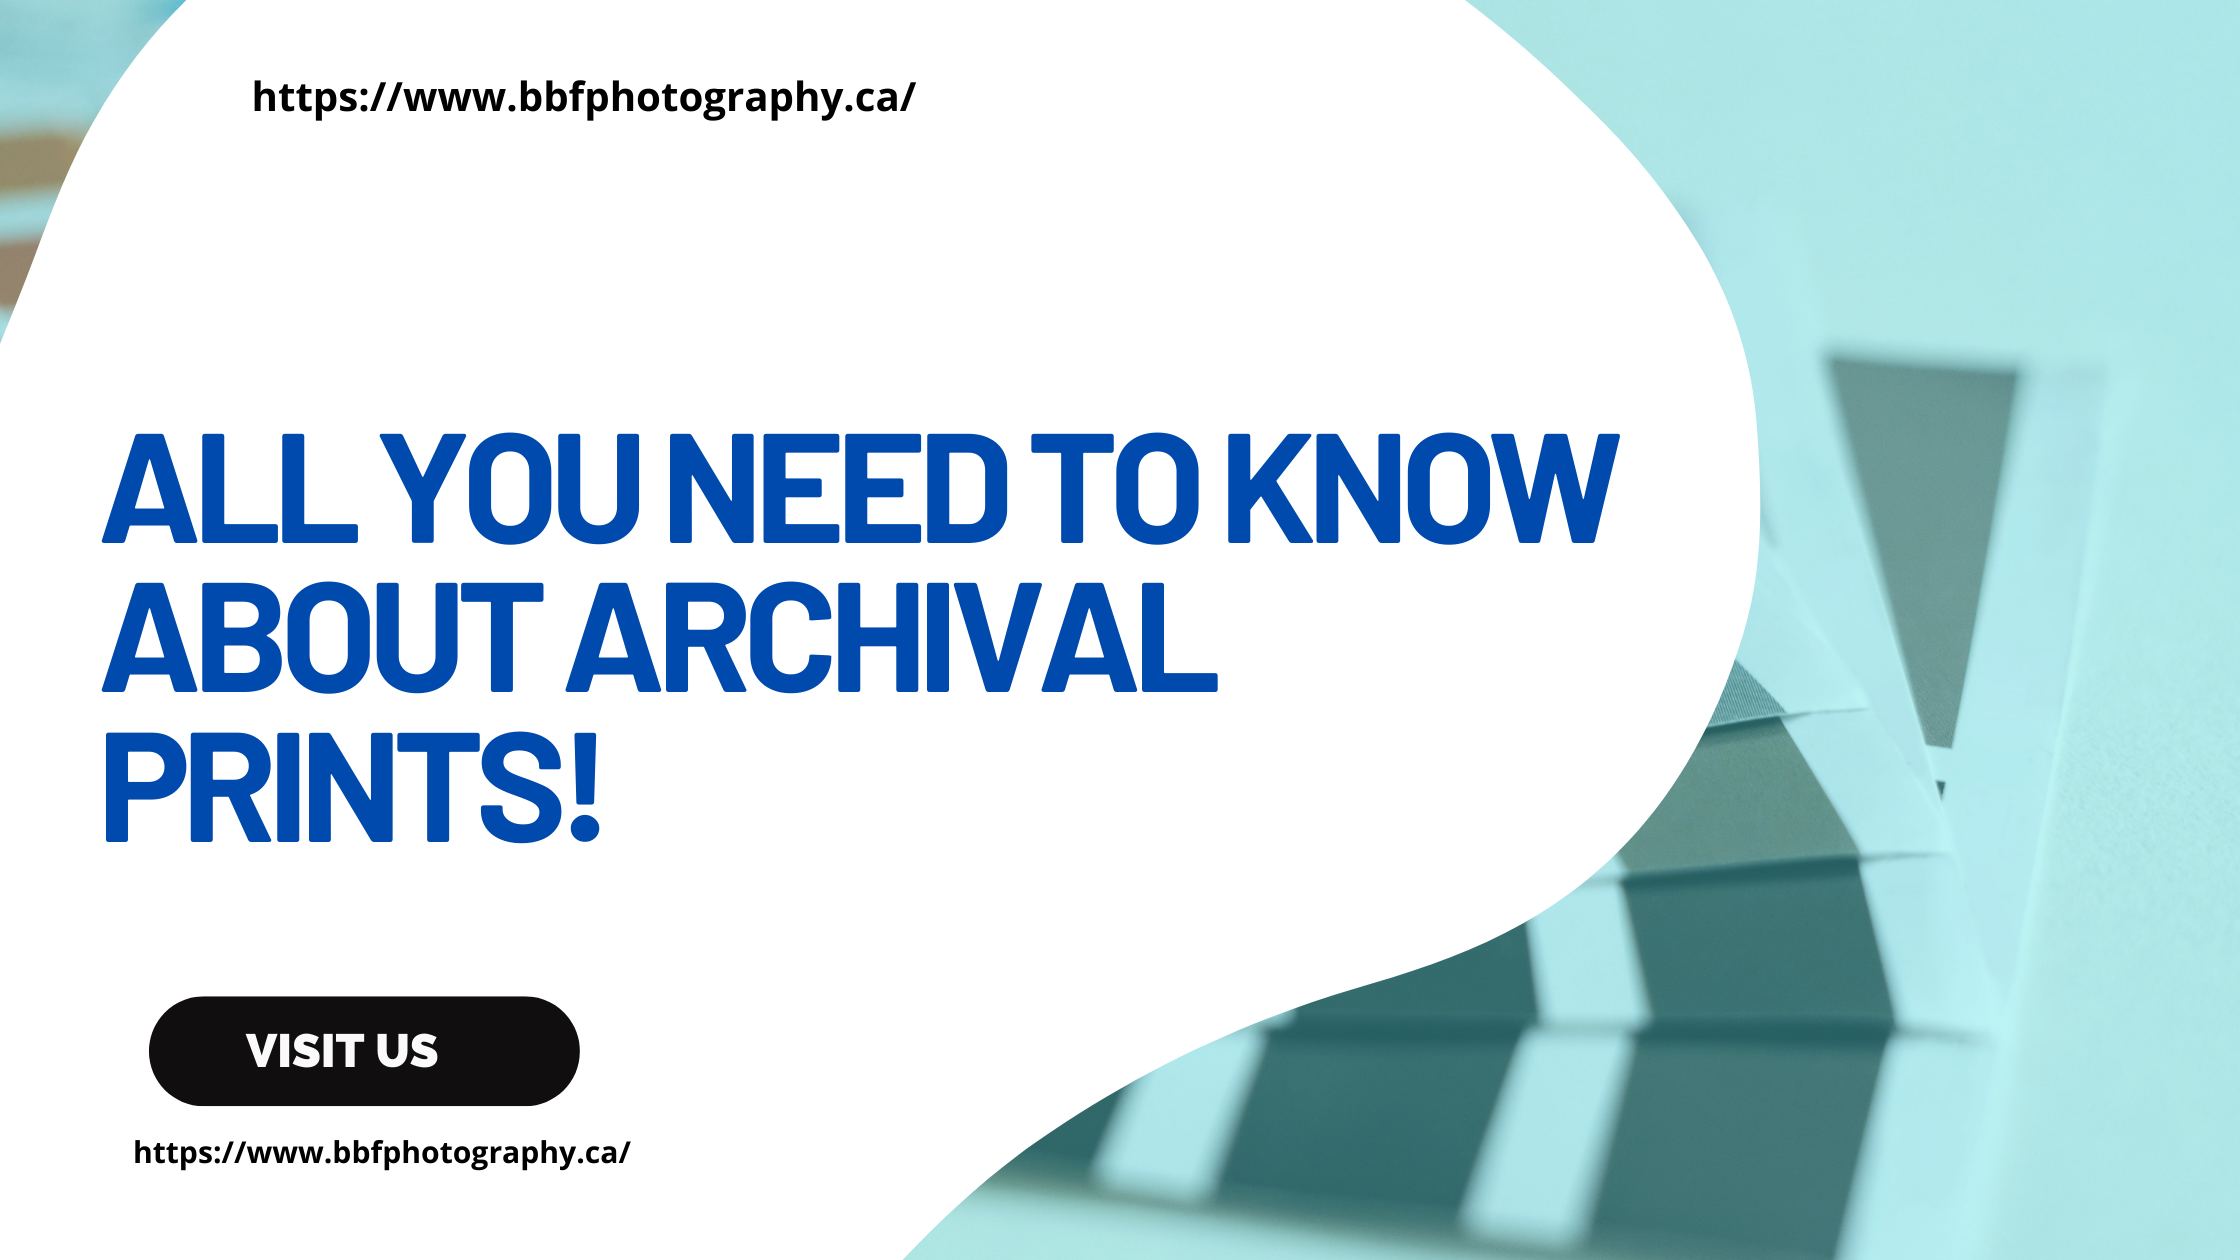 All you need to know about archival prints!